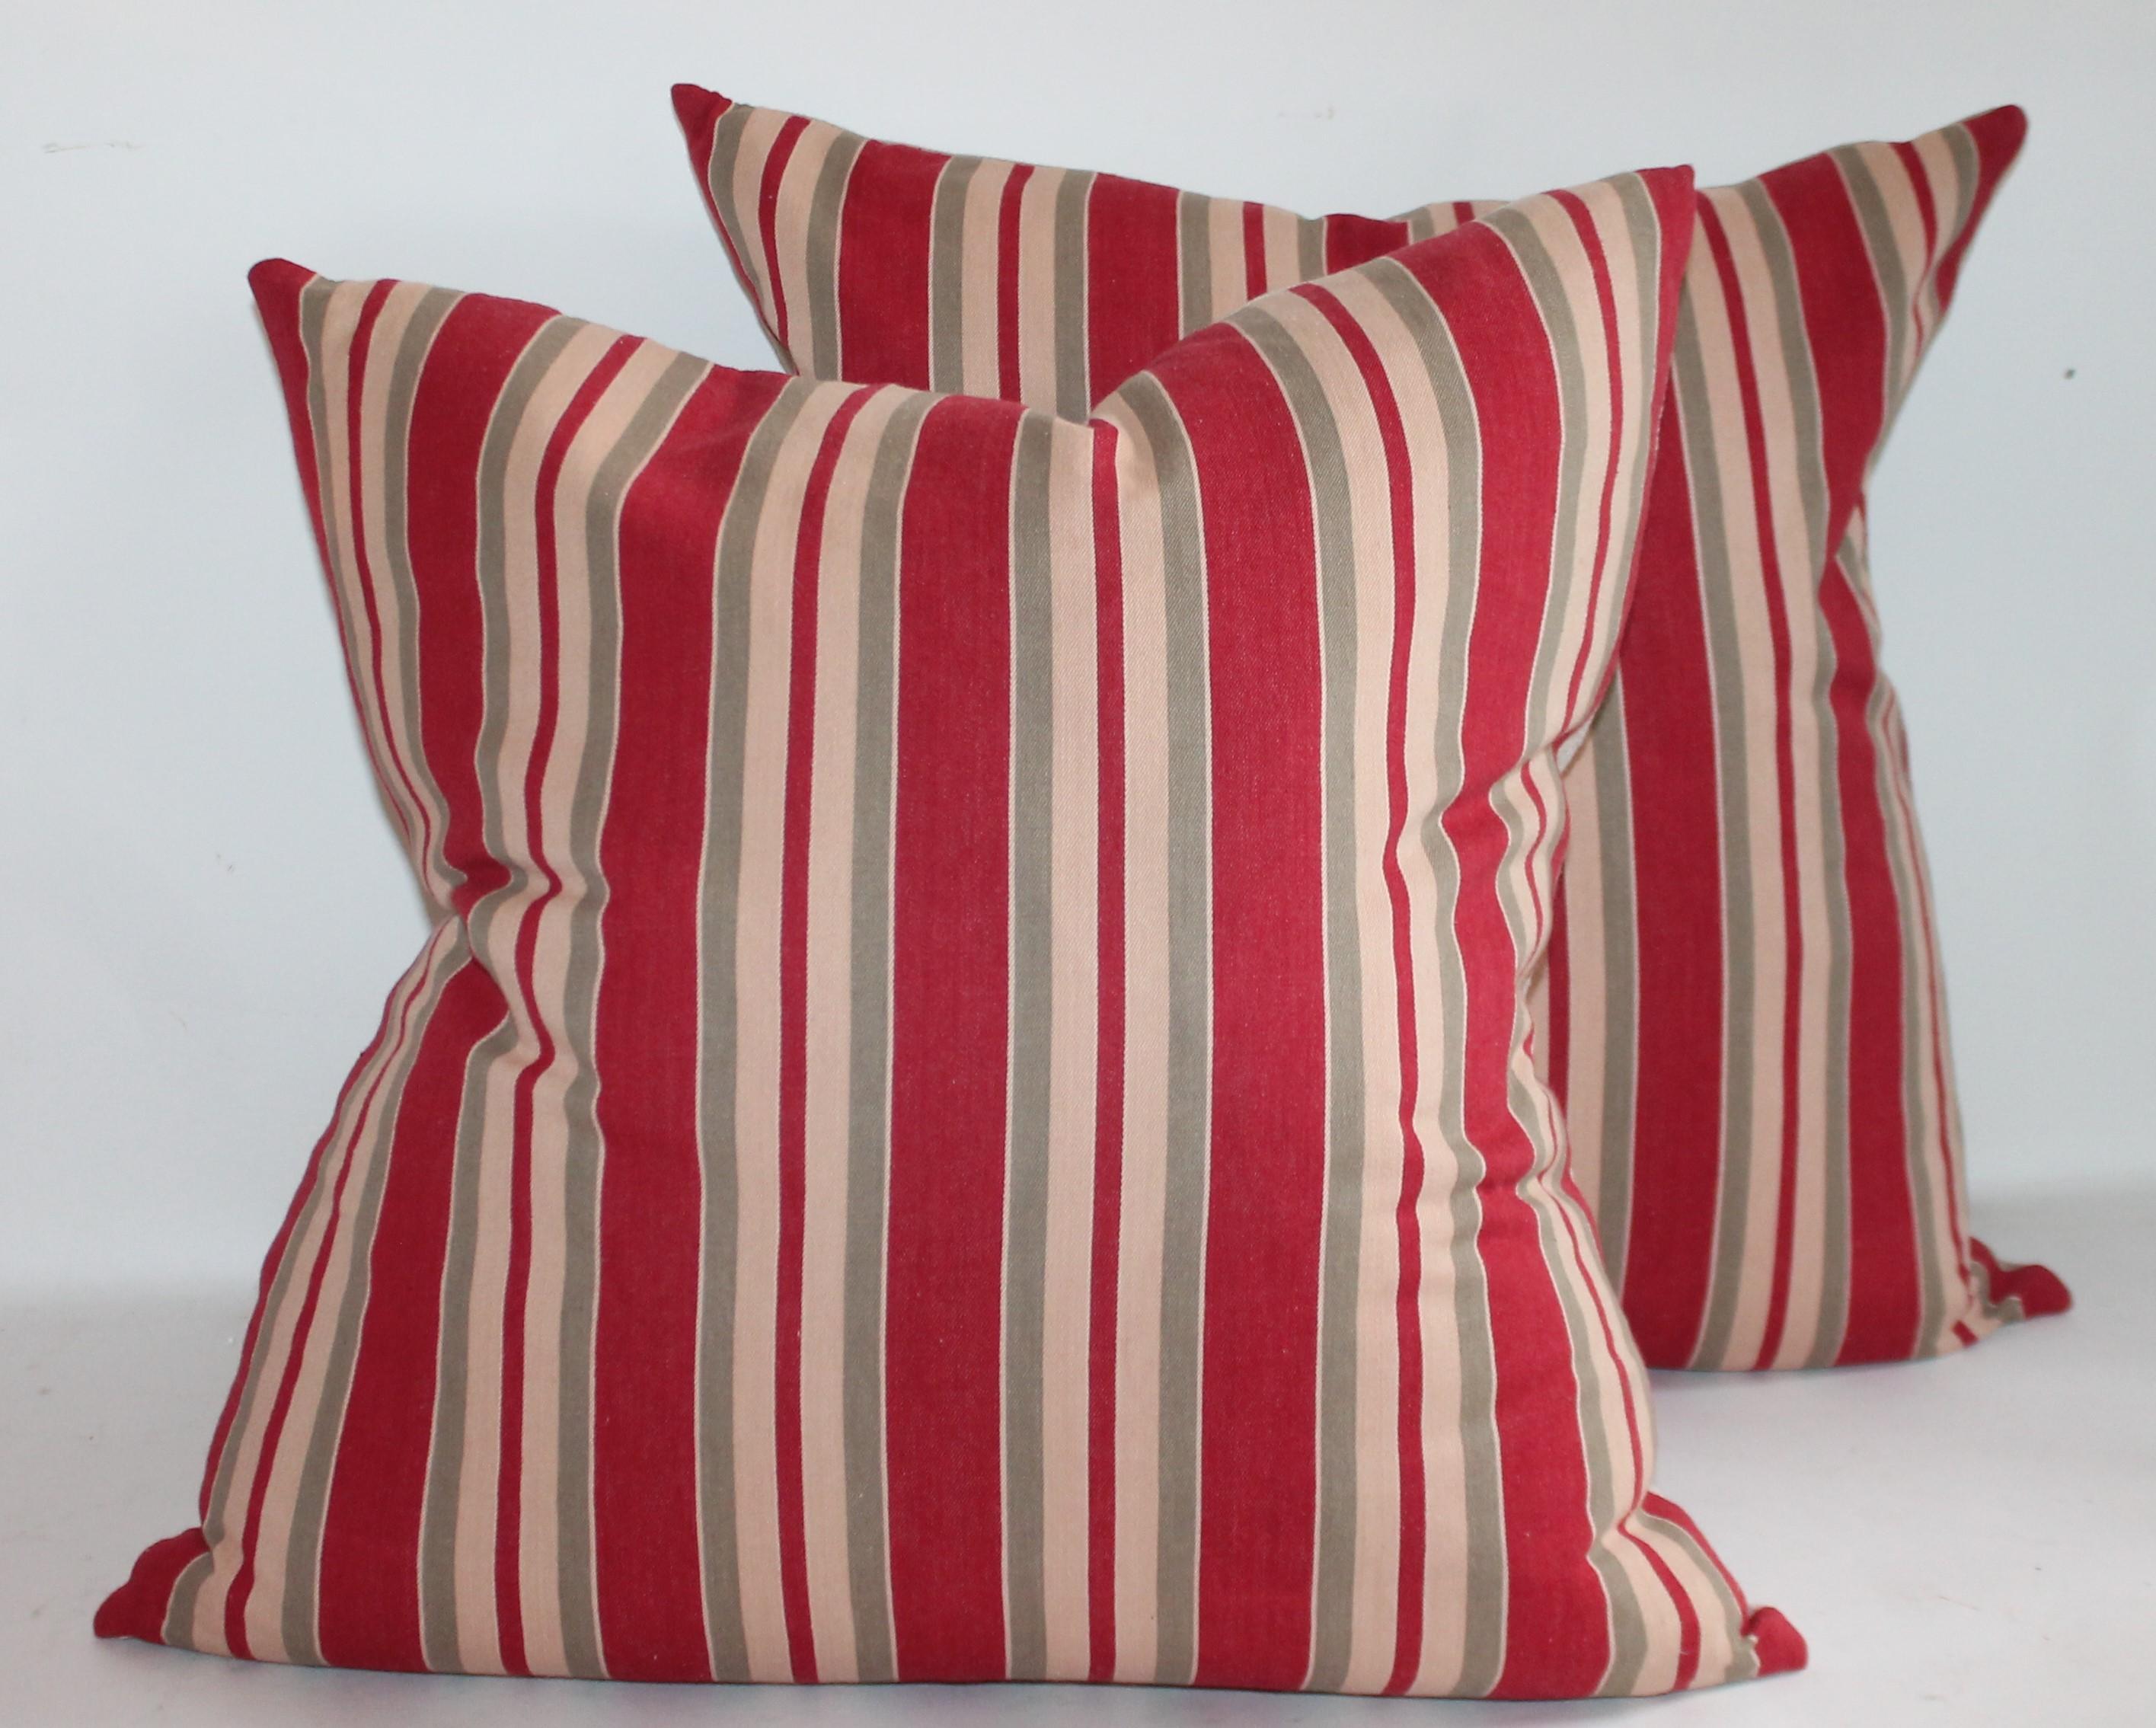 These fantastic vintage French ticking pillows have cotton linen backing and in fine condition. Down and feather fill. Two pairs of pillows.